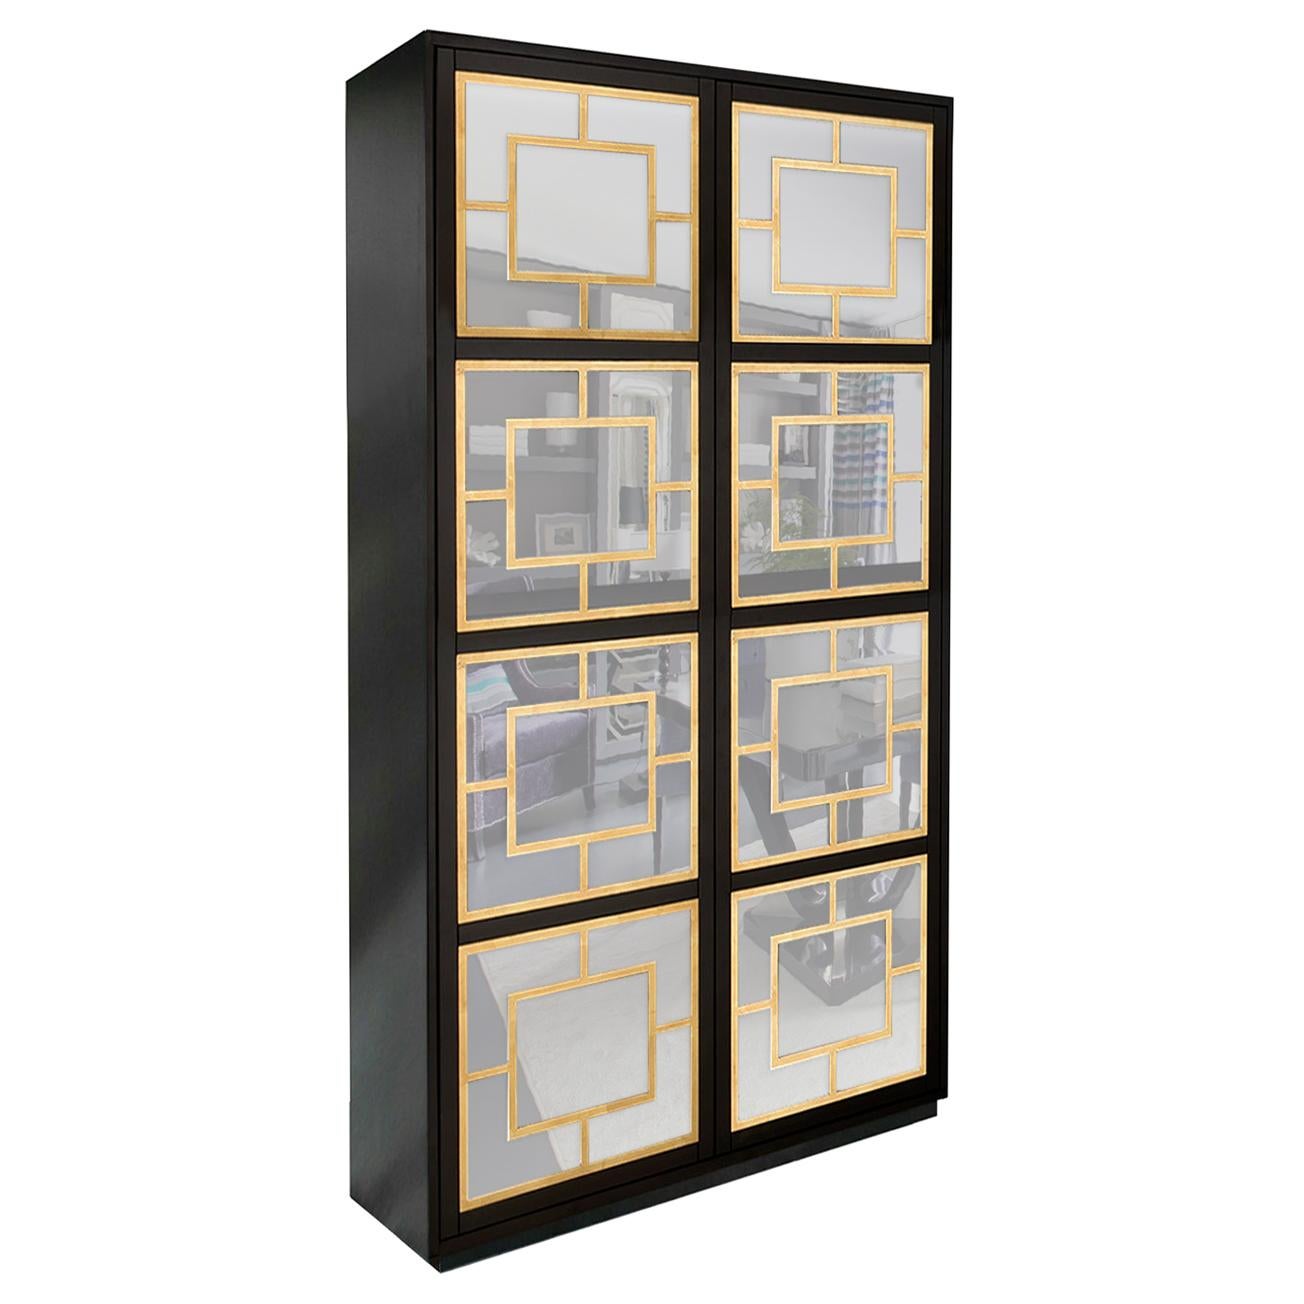 Isabella Costantini, Italy, Zoe Armoire D40 Mirrored Doors and Plinth Base